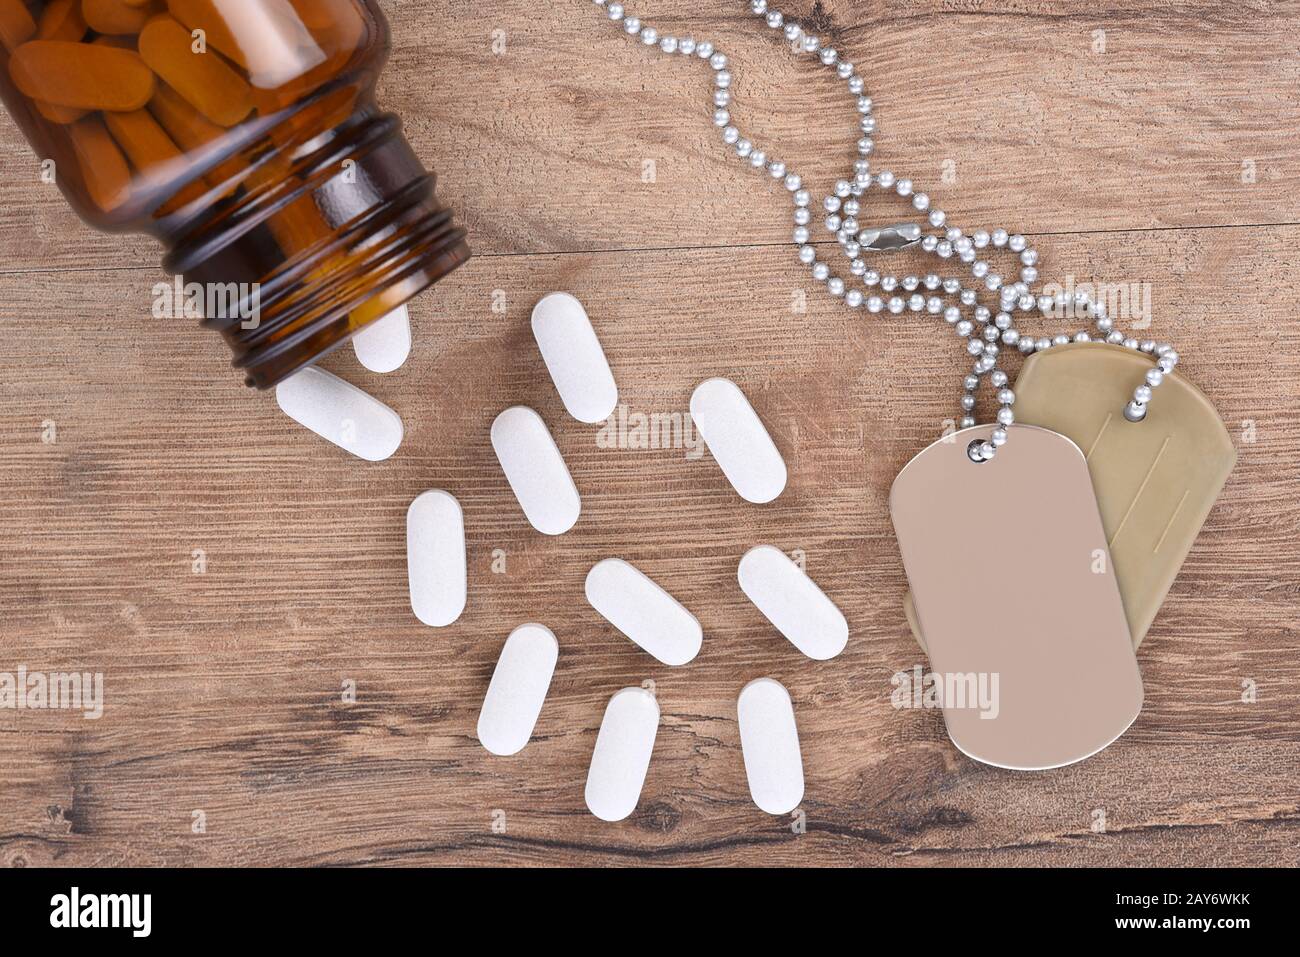 Military and Veterans Health Care Concept. Dog tags and pill bottle with tablets spilling onto the wood table background. Stock Photo